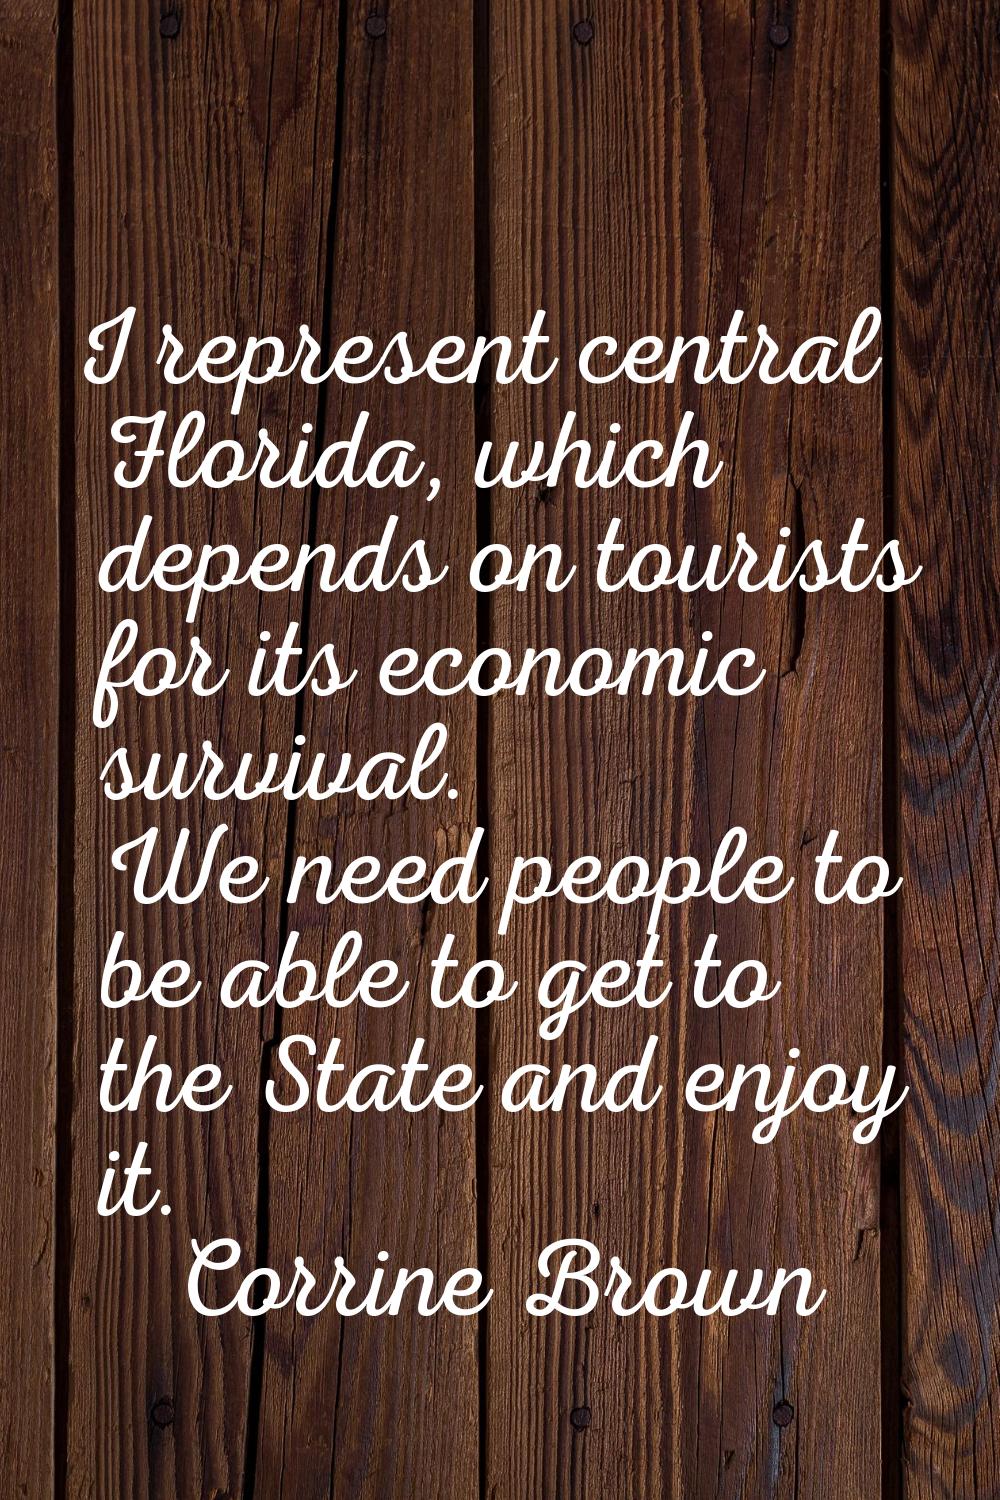 I represent central Florida, which depends on tourists for its economic survival. We need people to